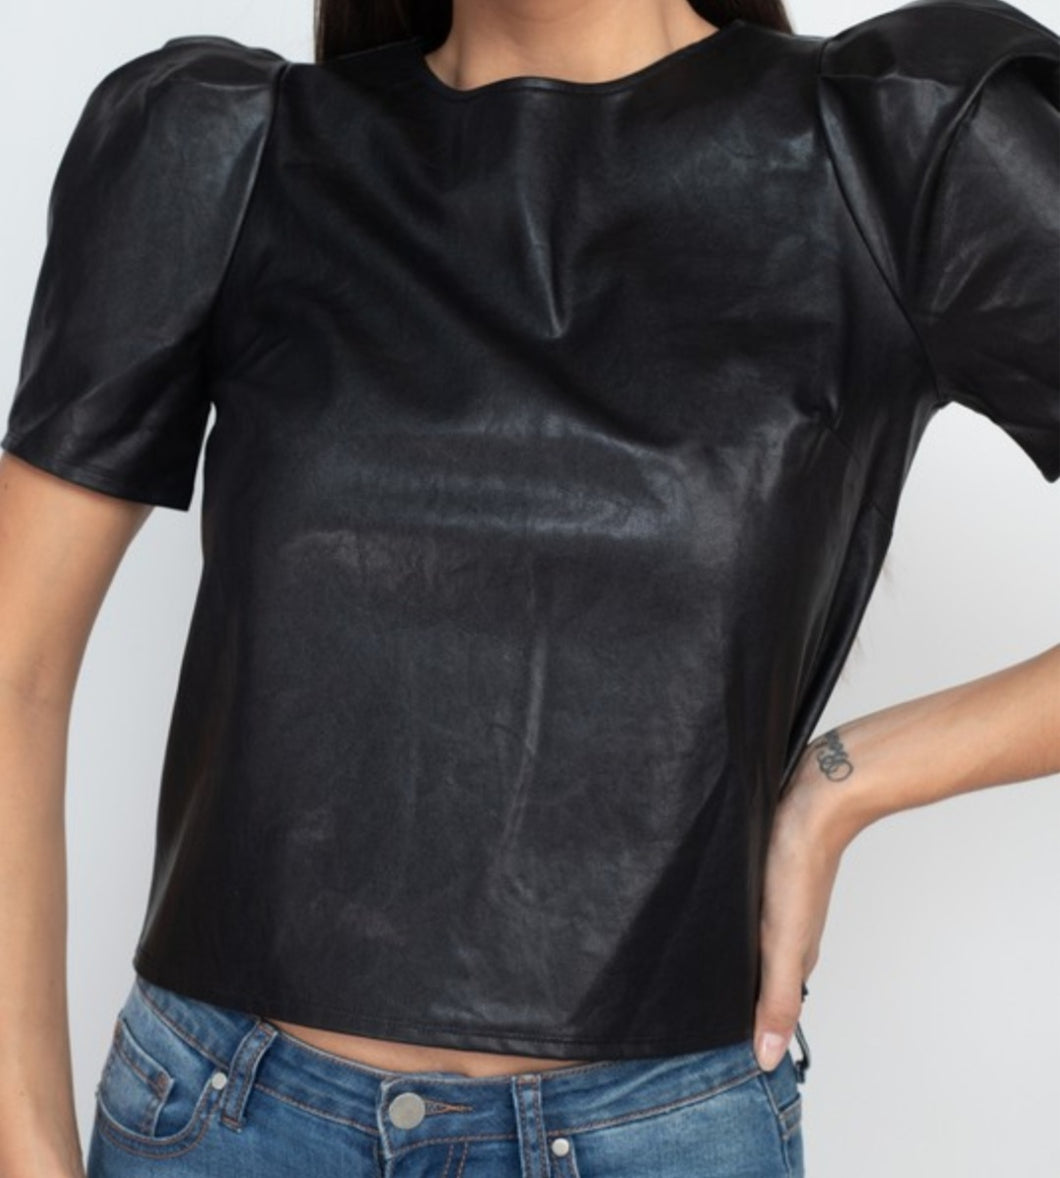 Add a edgy attitude to your weekend wardrobe with this cute knitted top. This top is featured with a soft buttery faux leather, round neckline and short sleeves. Style this top with light washed jeans high heels boots for a head-turning combo.